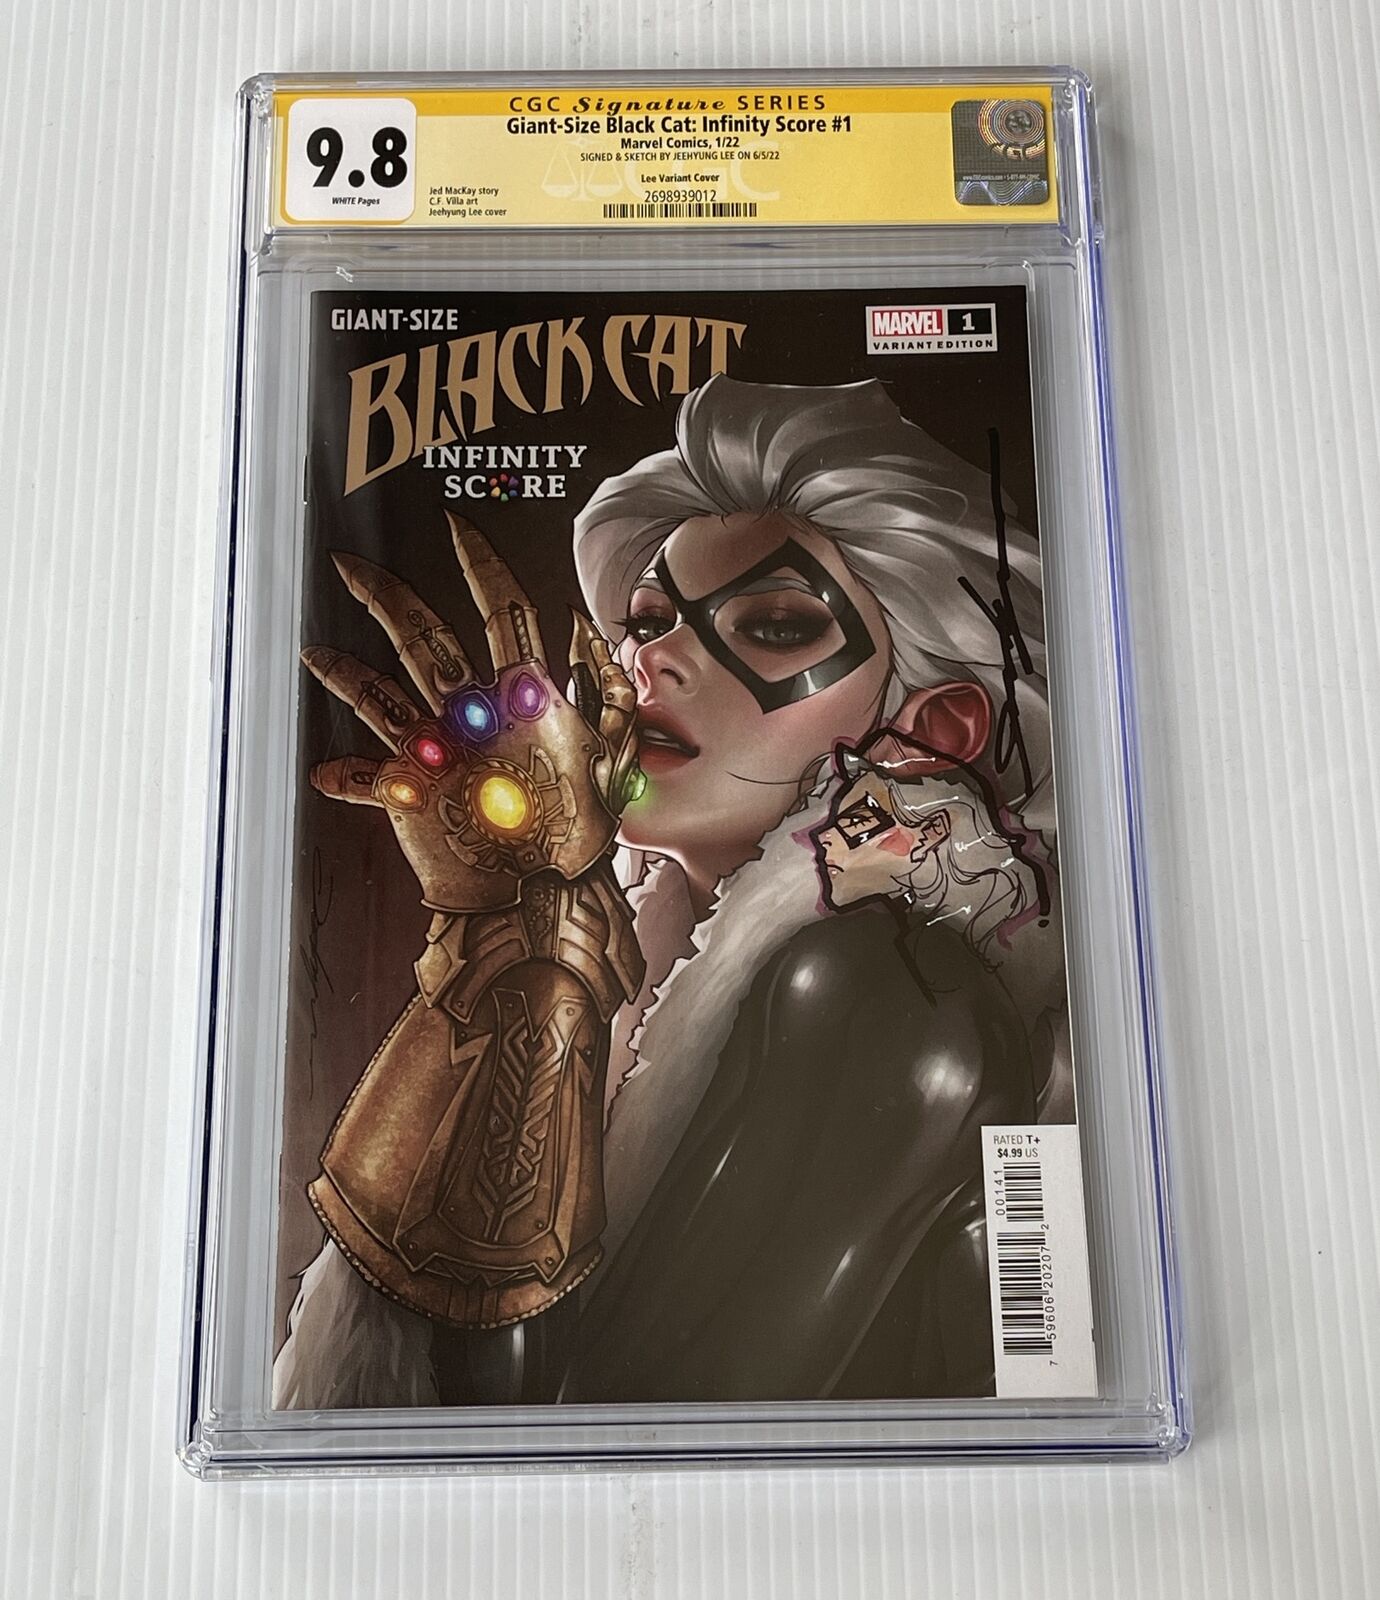 Jeehyung Lee Signed Sketch Black Cat Infinity Trade Marvel Comics CGC 9.8 4